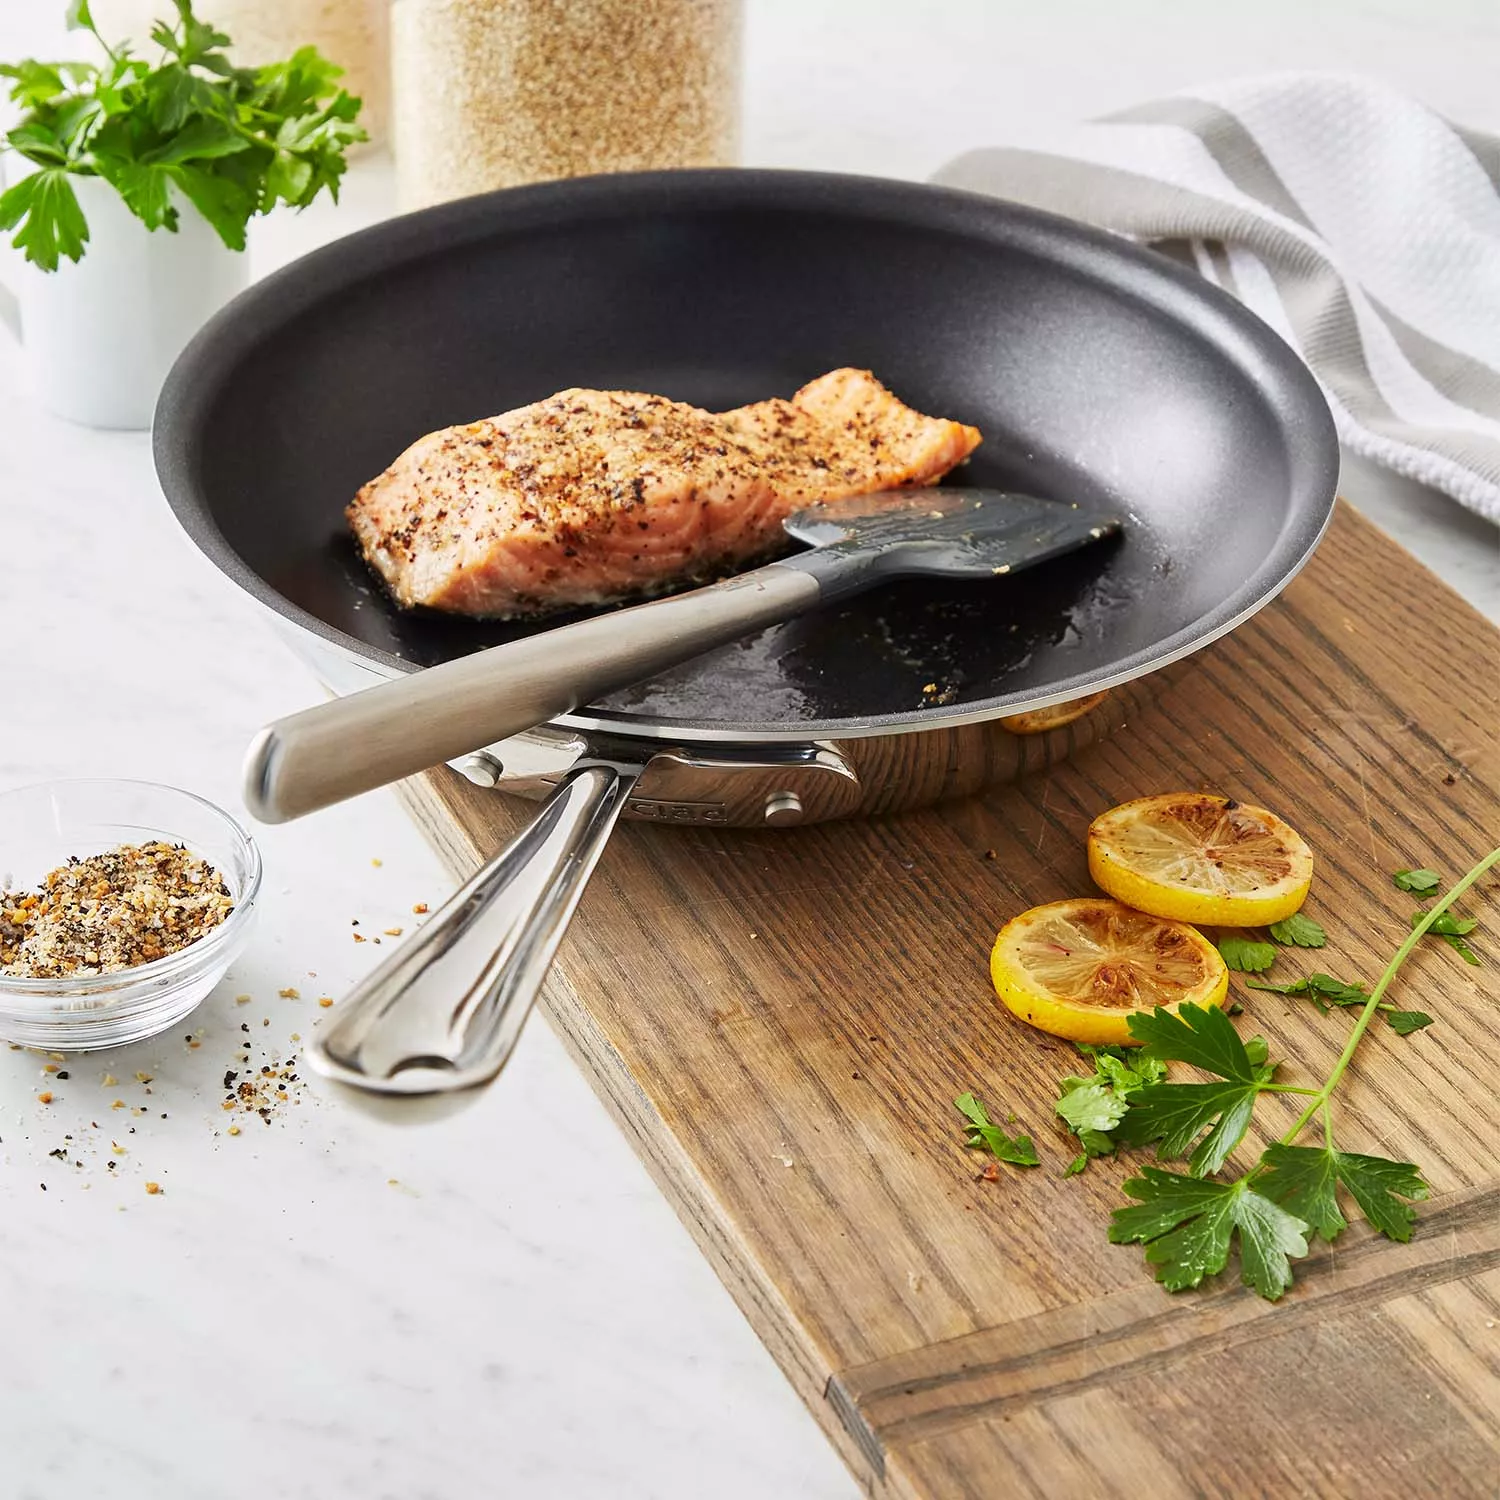 All-Clad November deal: Our favorite nonstick All-Clad cookware